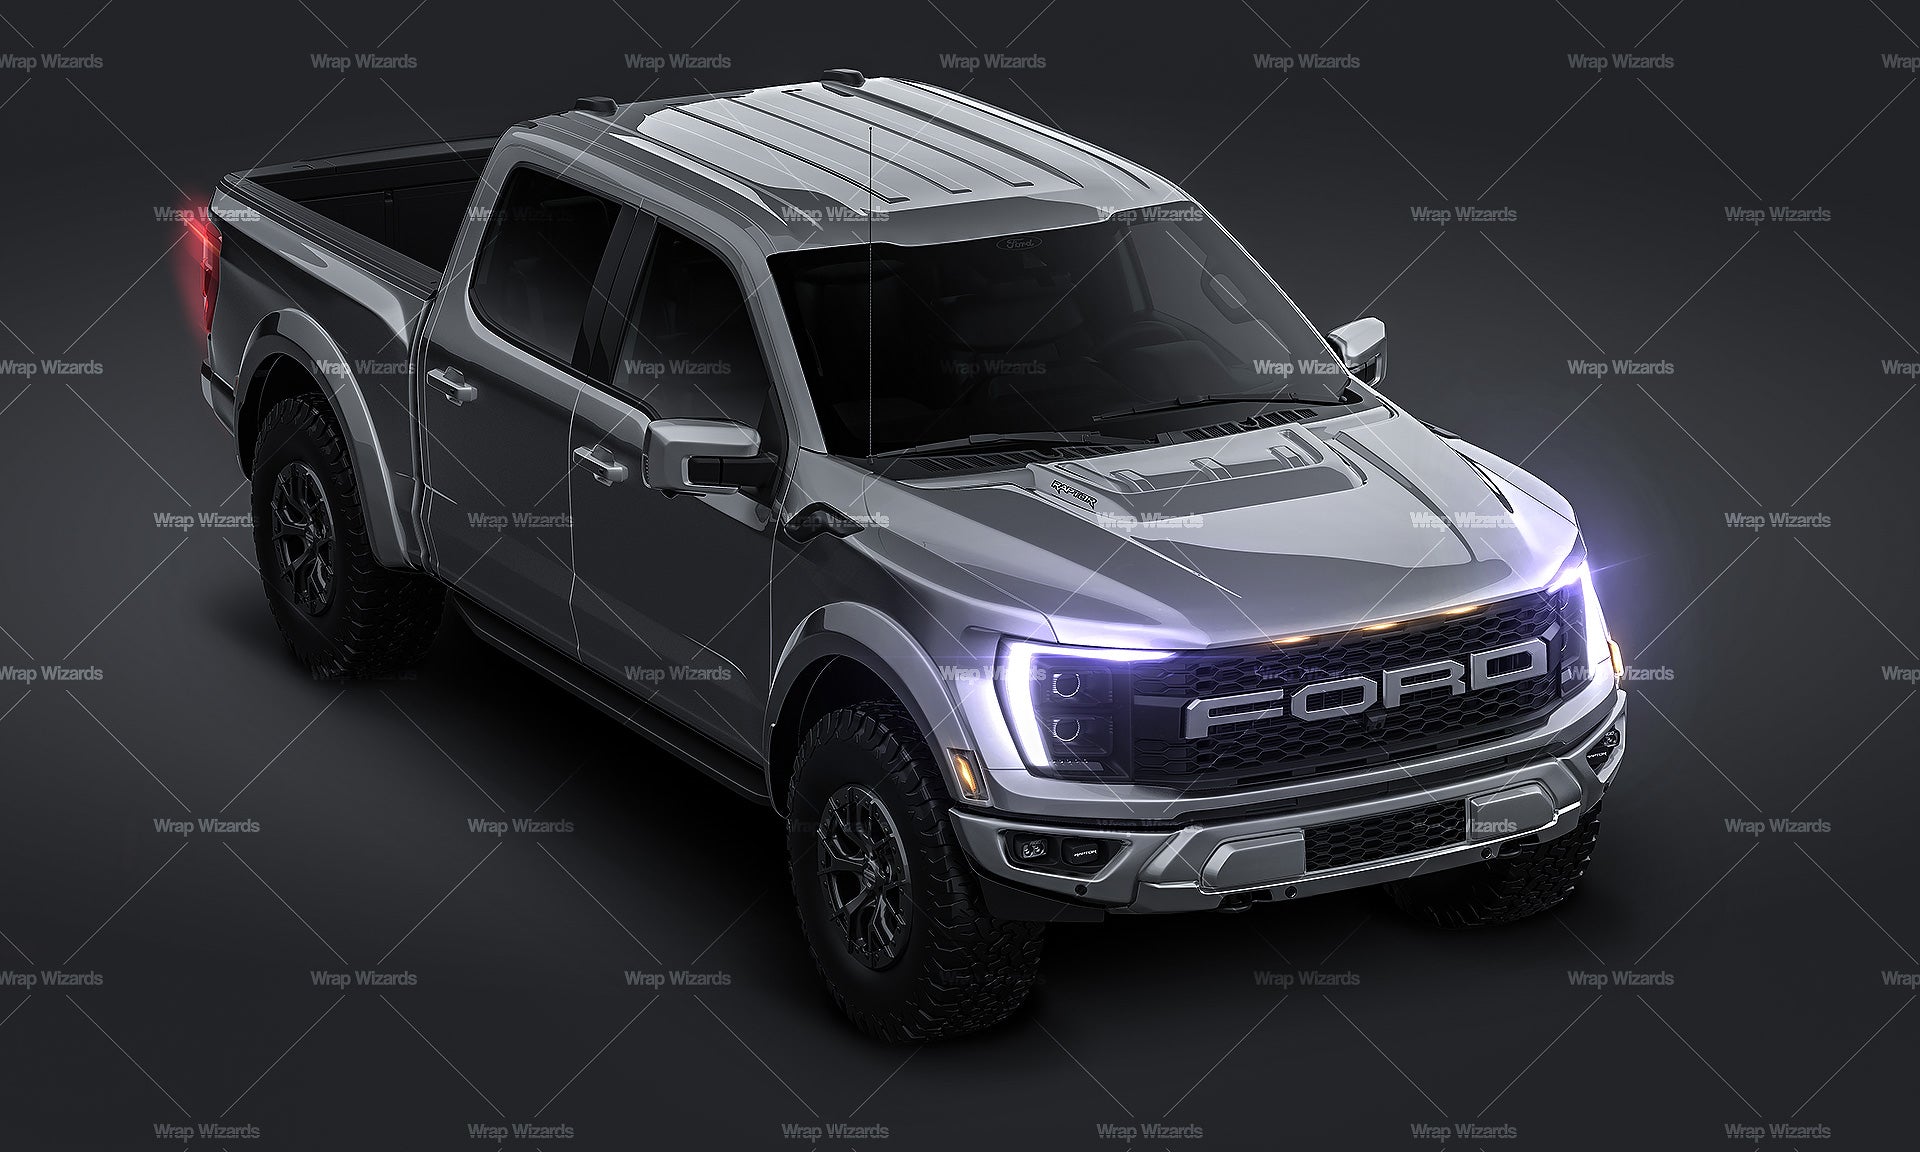 3/4 FRONT VIEW - Ford F150 Raptor 2021 - Truck/Pick-up Mockup